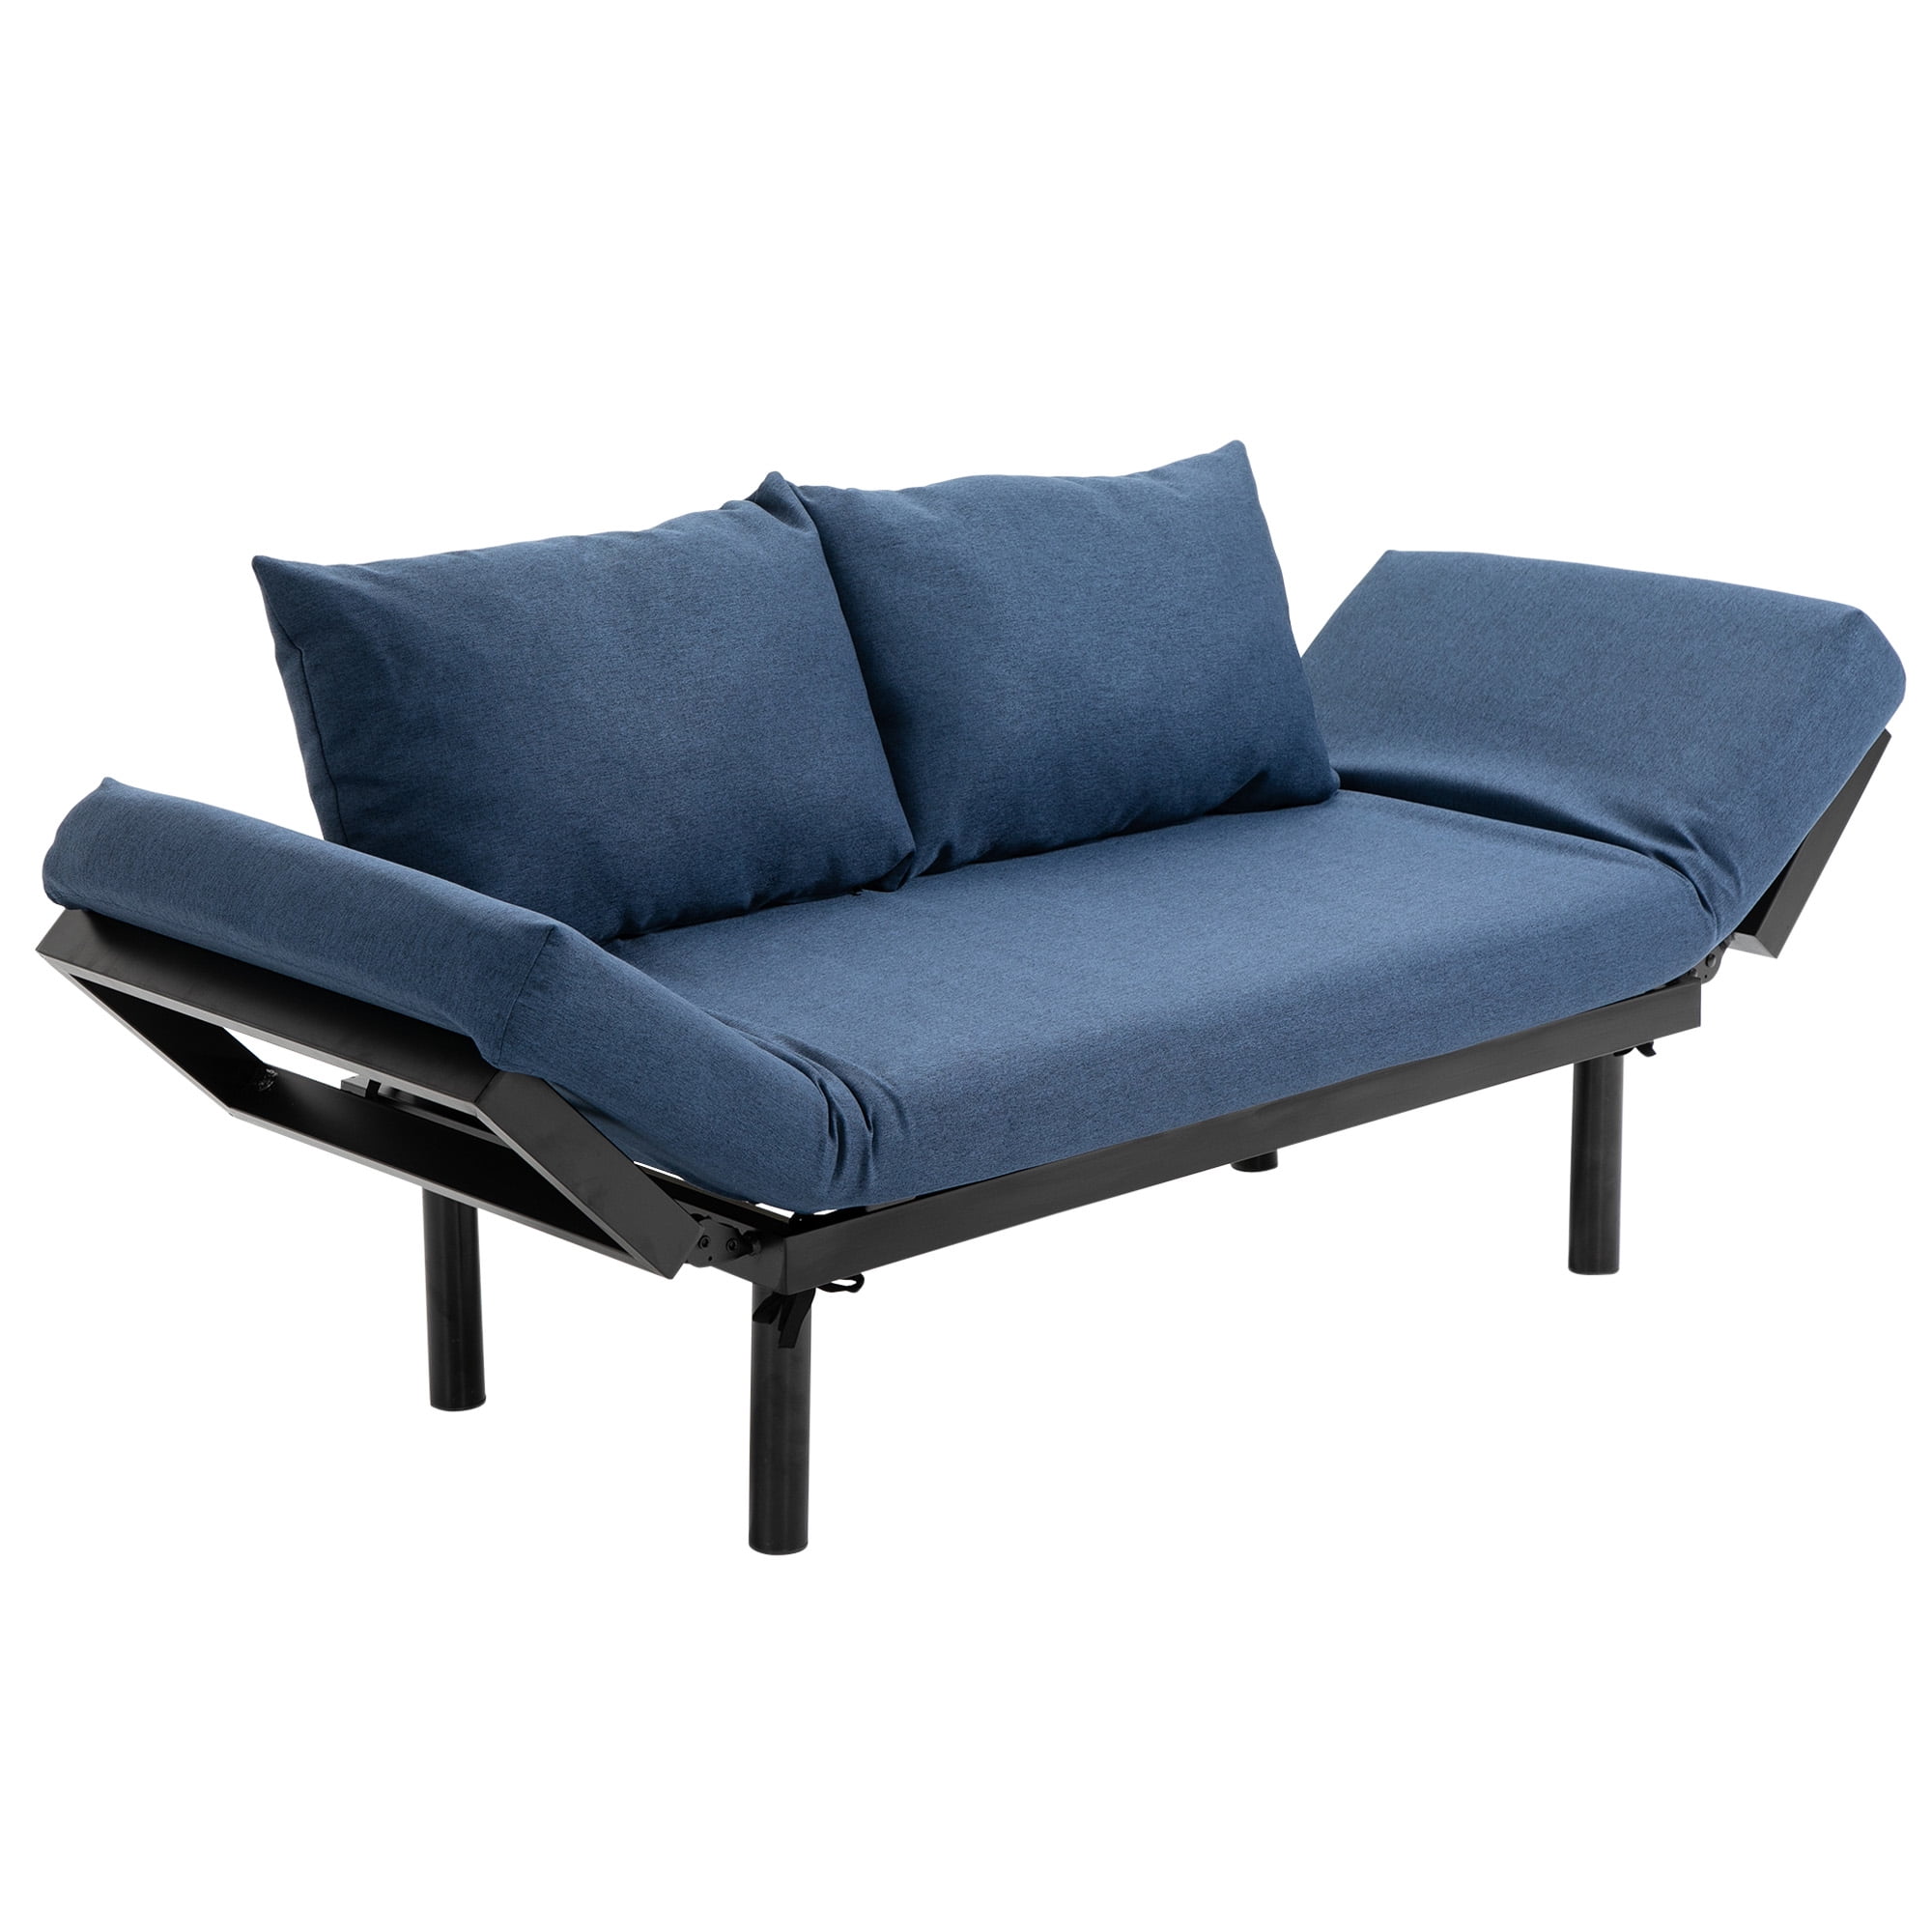 Chaise Lounger Sofa Bed, Homcom Bed End Side Chaise Lounge Sofa